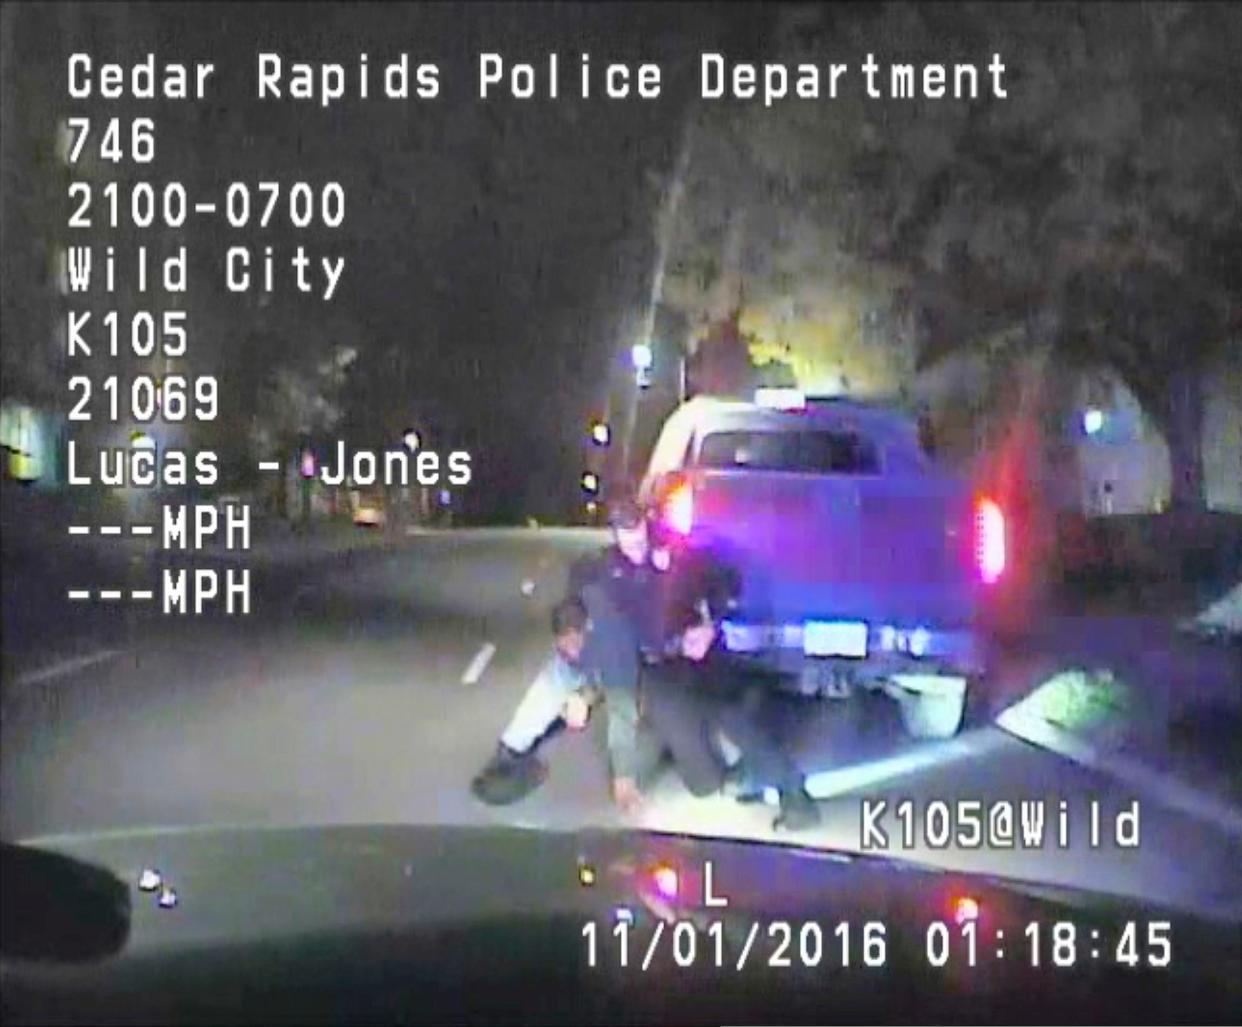 FILE--In this file image made from a Nov. 1, 2016 dashcam video released by Cedar Rapids Police Department, unarmed black motorist Jerime Mitchell struggles with officer Lucas Jones before the driver is shot and paralyzed. 